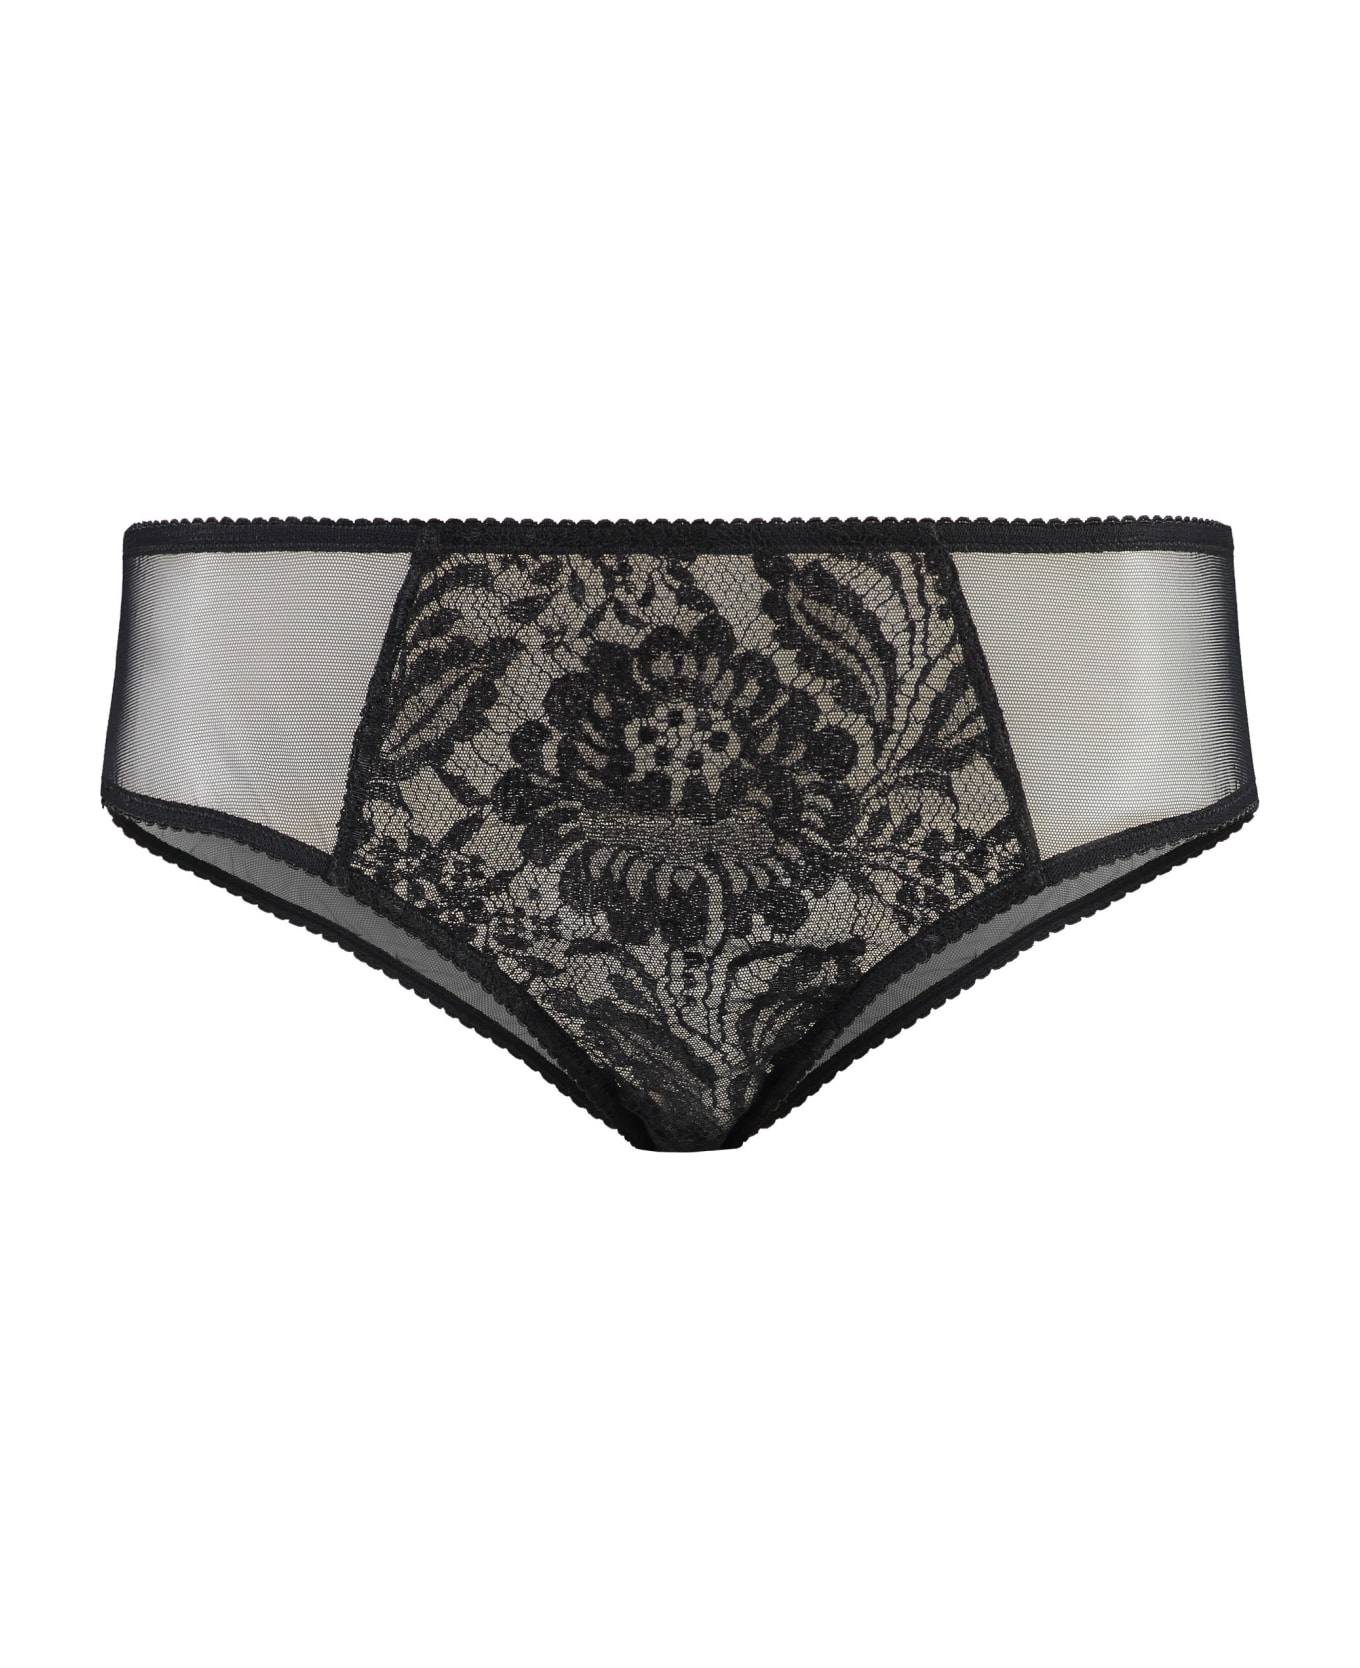 Dolce & Gabbana Lace And Tulle Panties - Black ショーツ